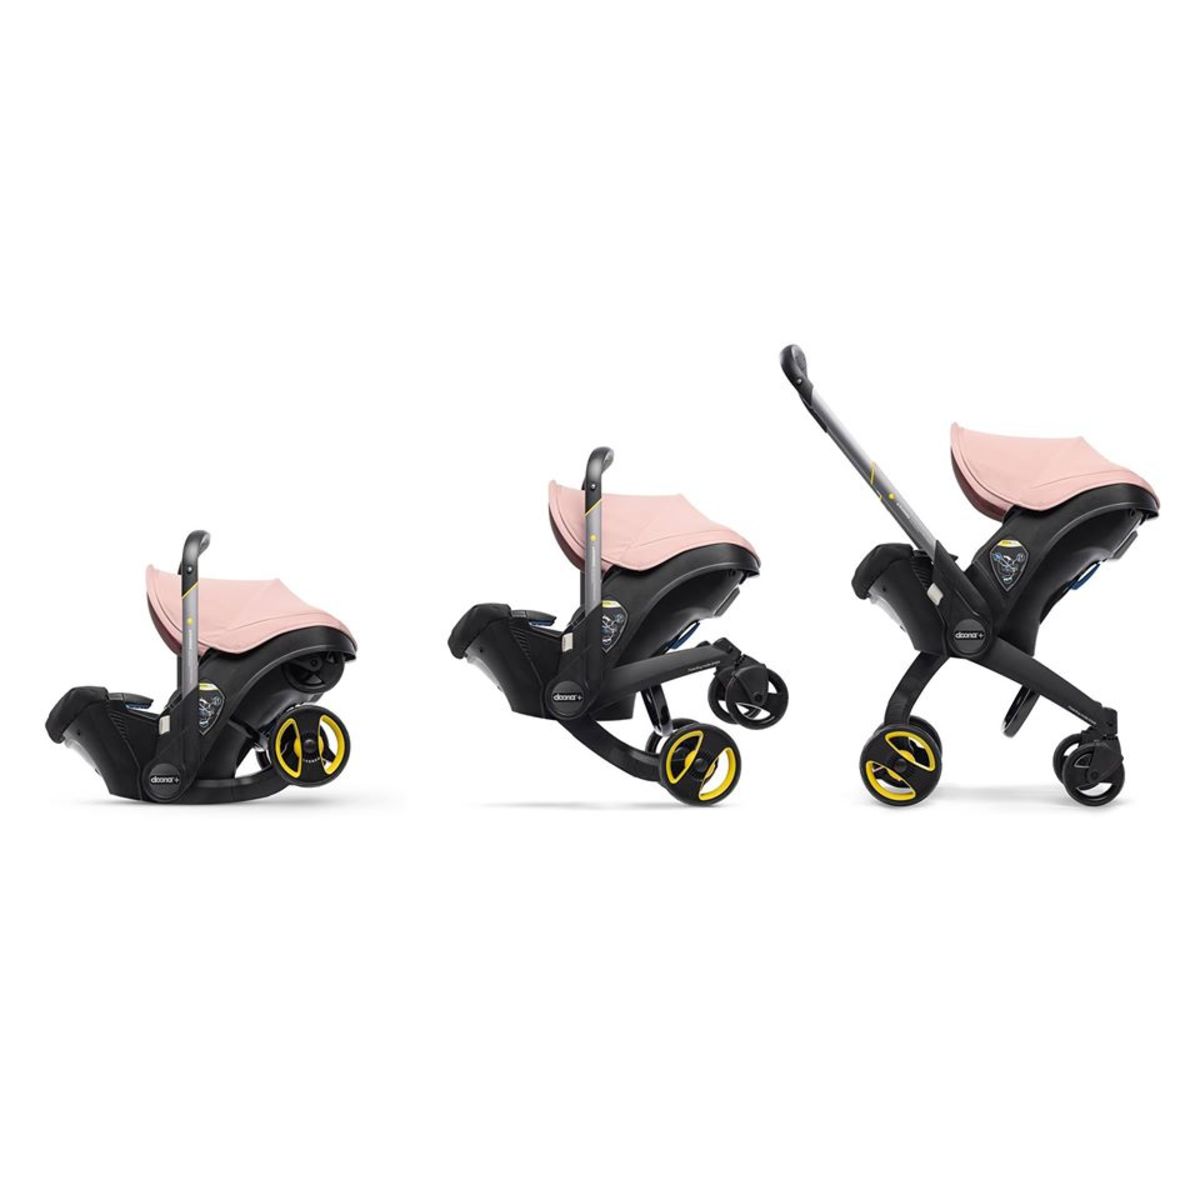 Doona Infant Carseat That Converts To A Stroller! - MomTrends